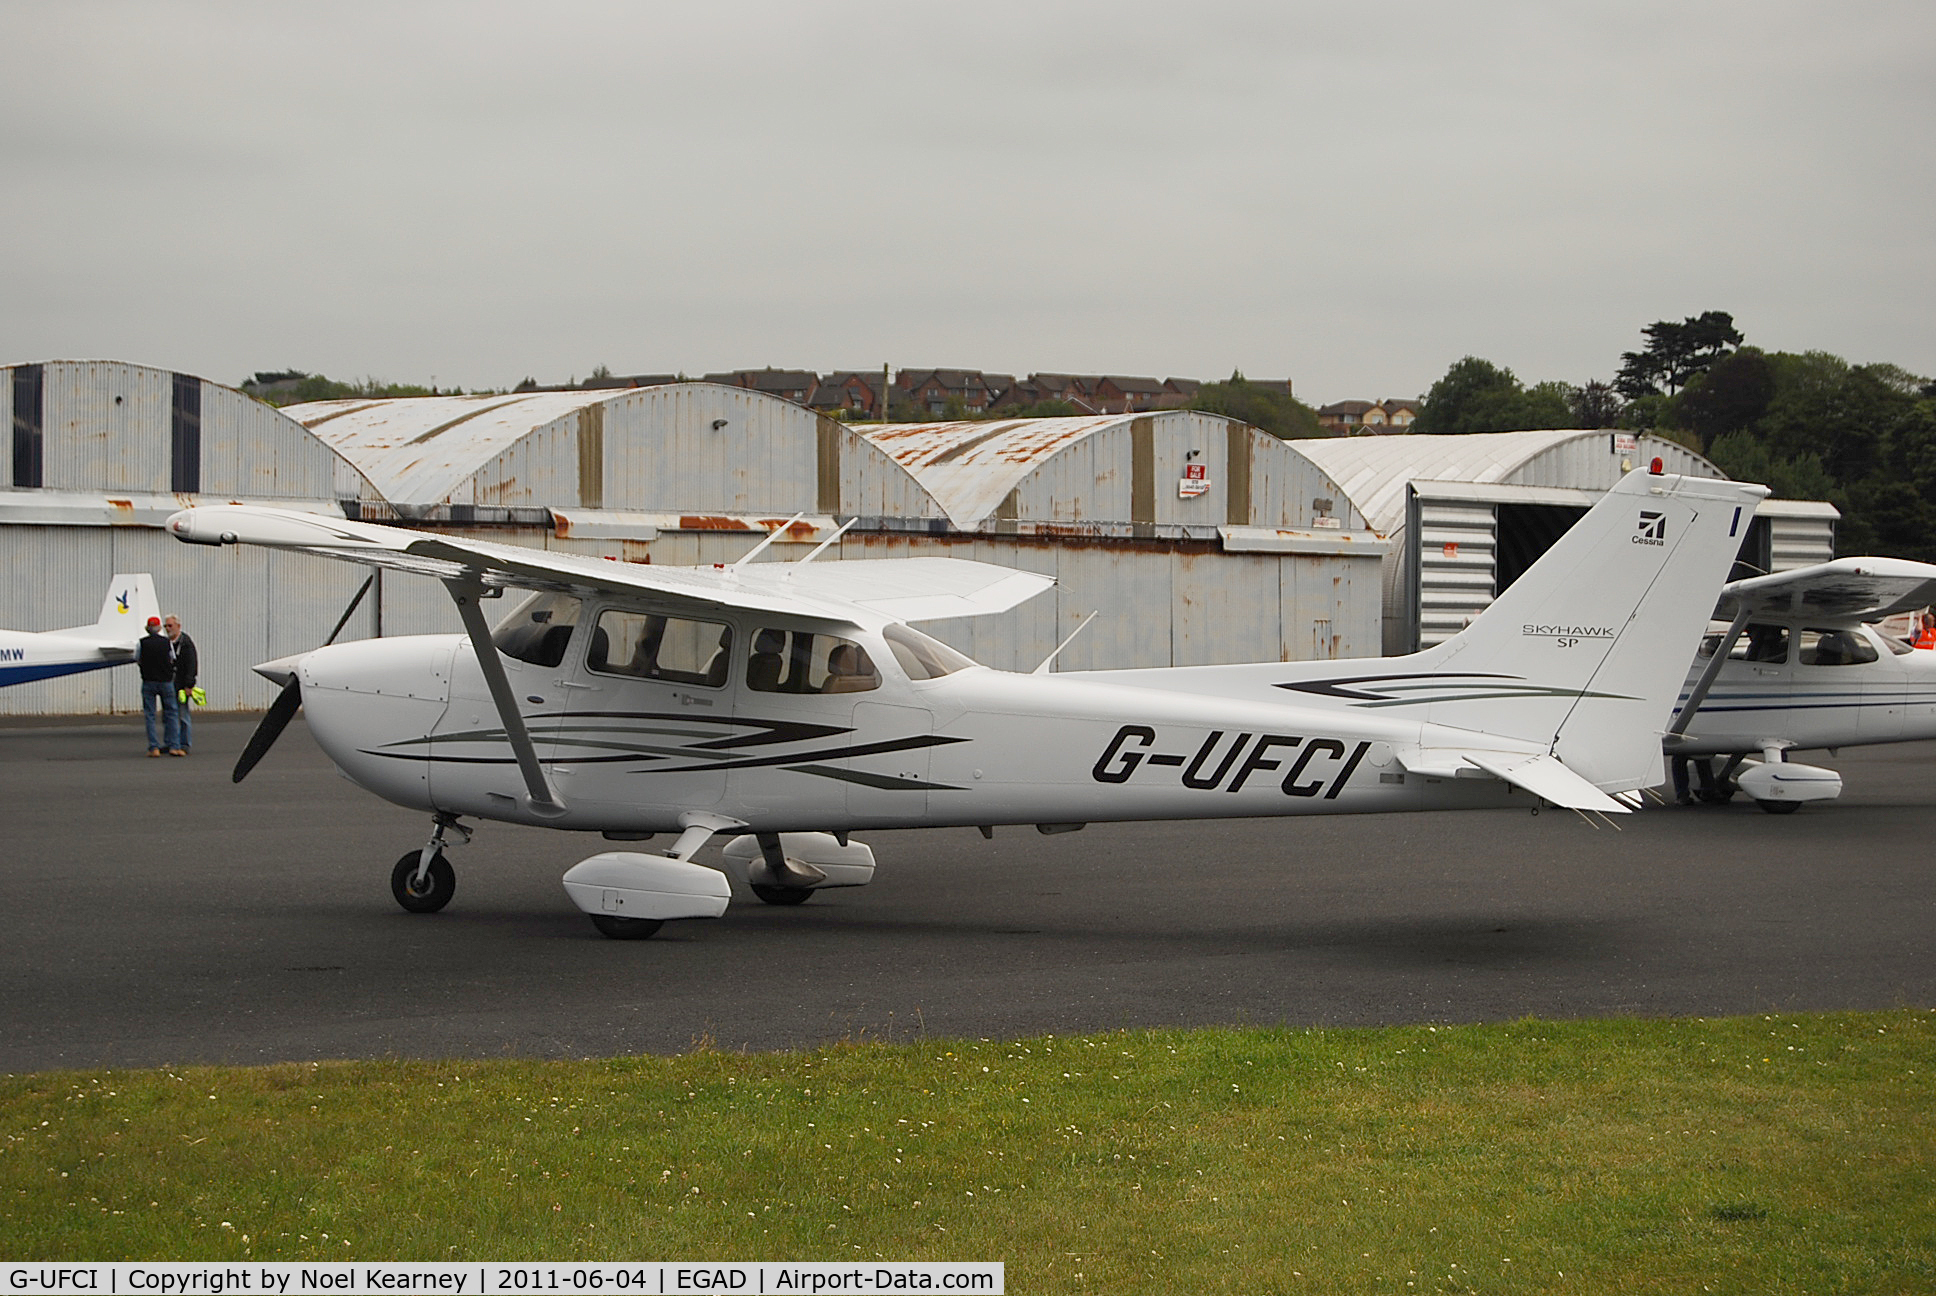 G-UFCI, 2007 Cessna 172S C/N 172S-10508, Parked on the apron at Newtownards Airfield.